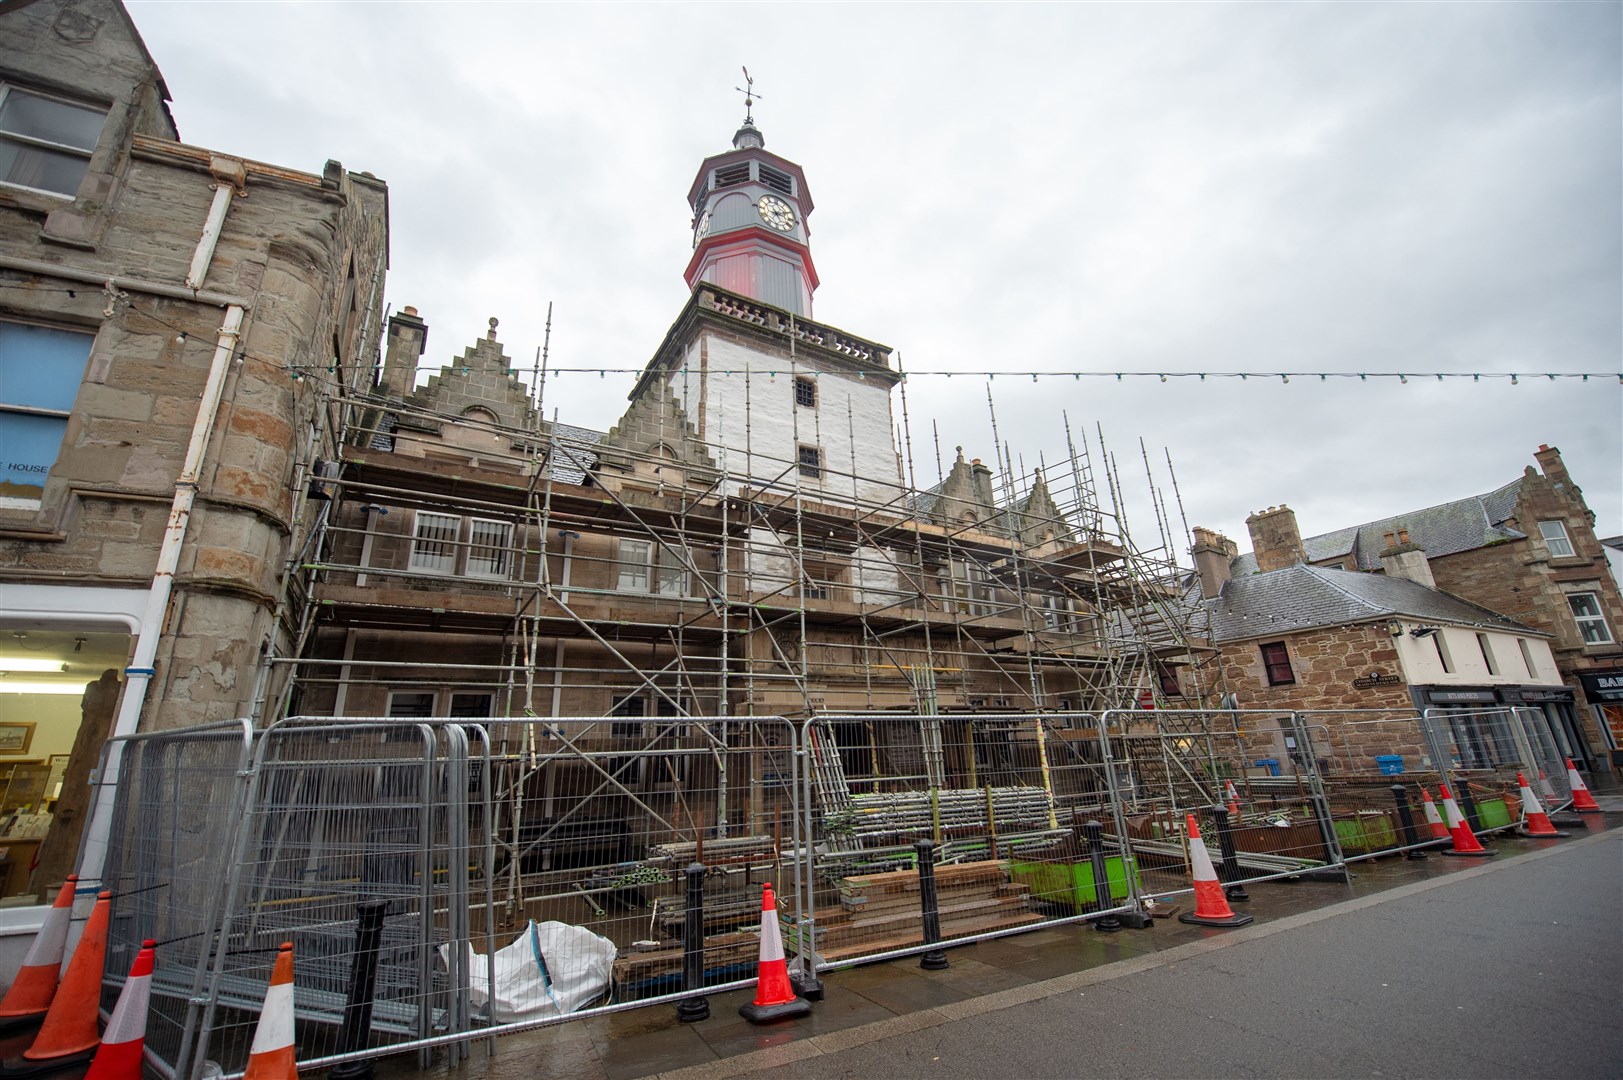 Scaffolding has gone up around Dingwall Town Hall as refurbishment work gets under way.